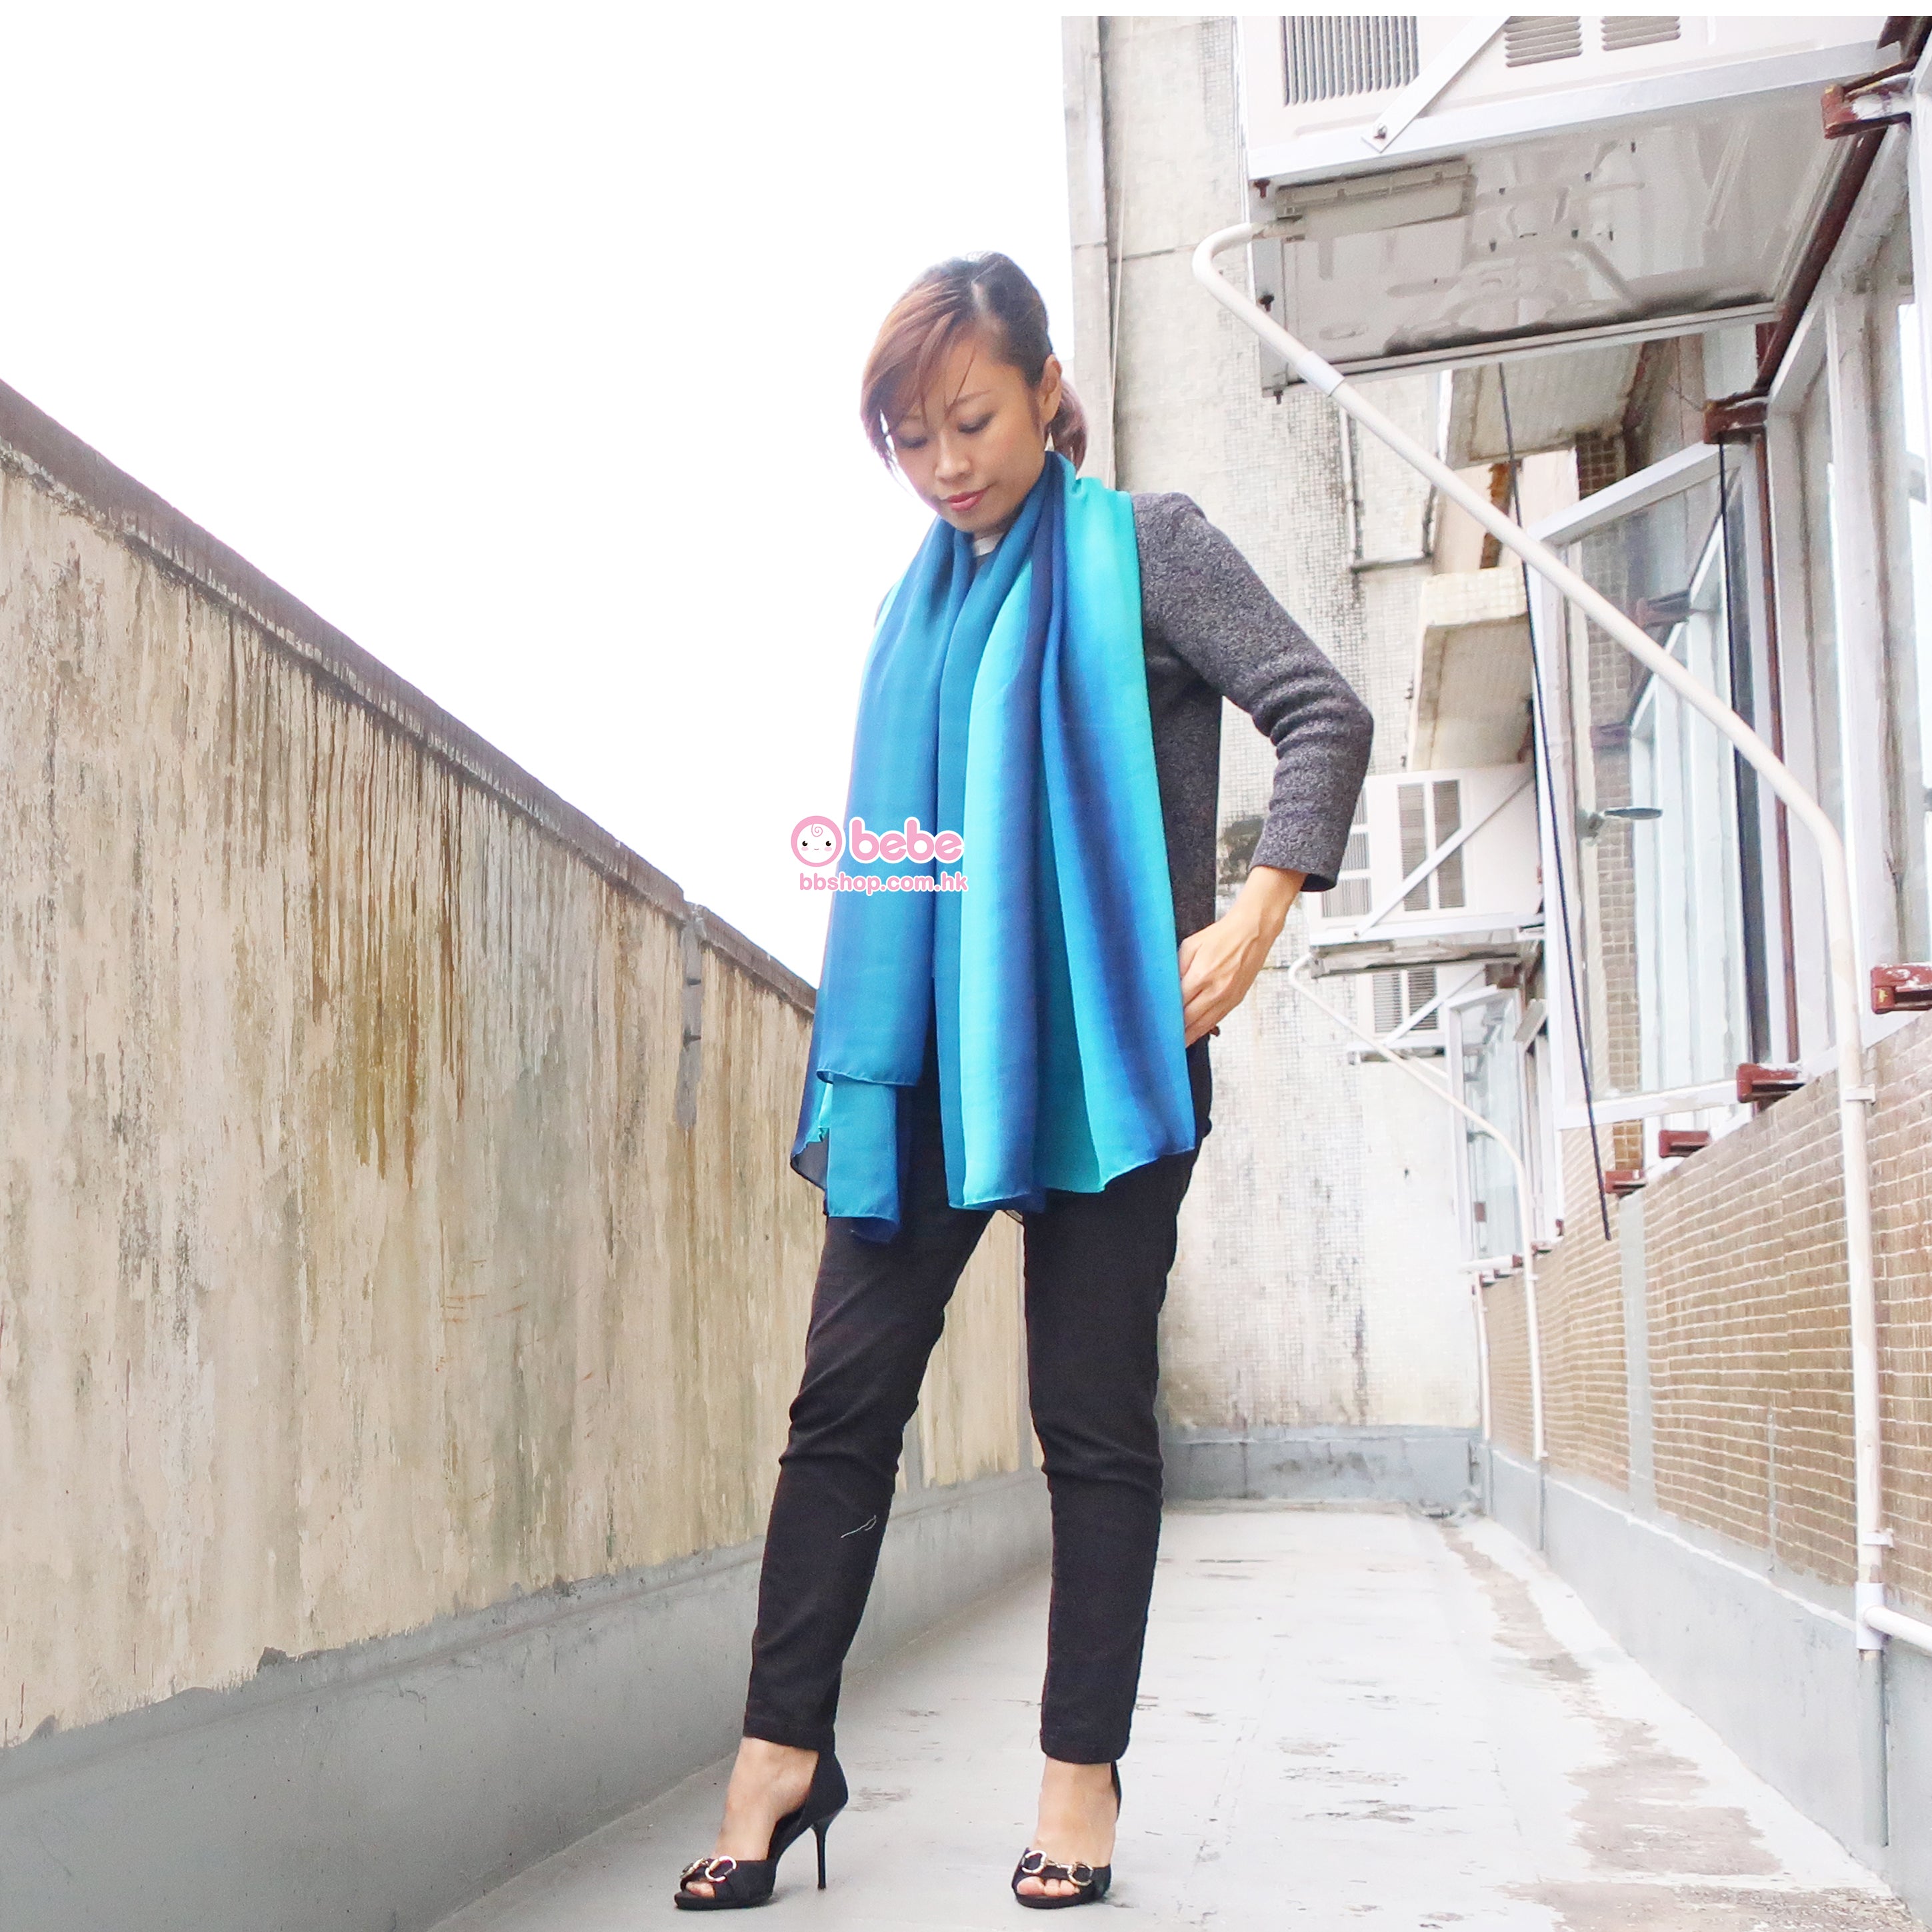 GS782 Blue-Turquoise Gradient Scarf for Adults (不可繡名)